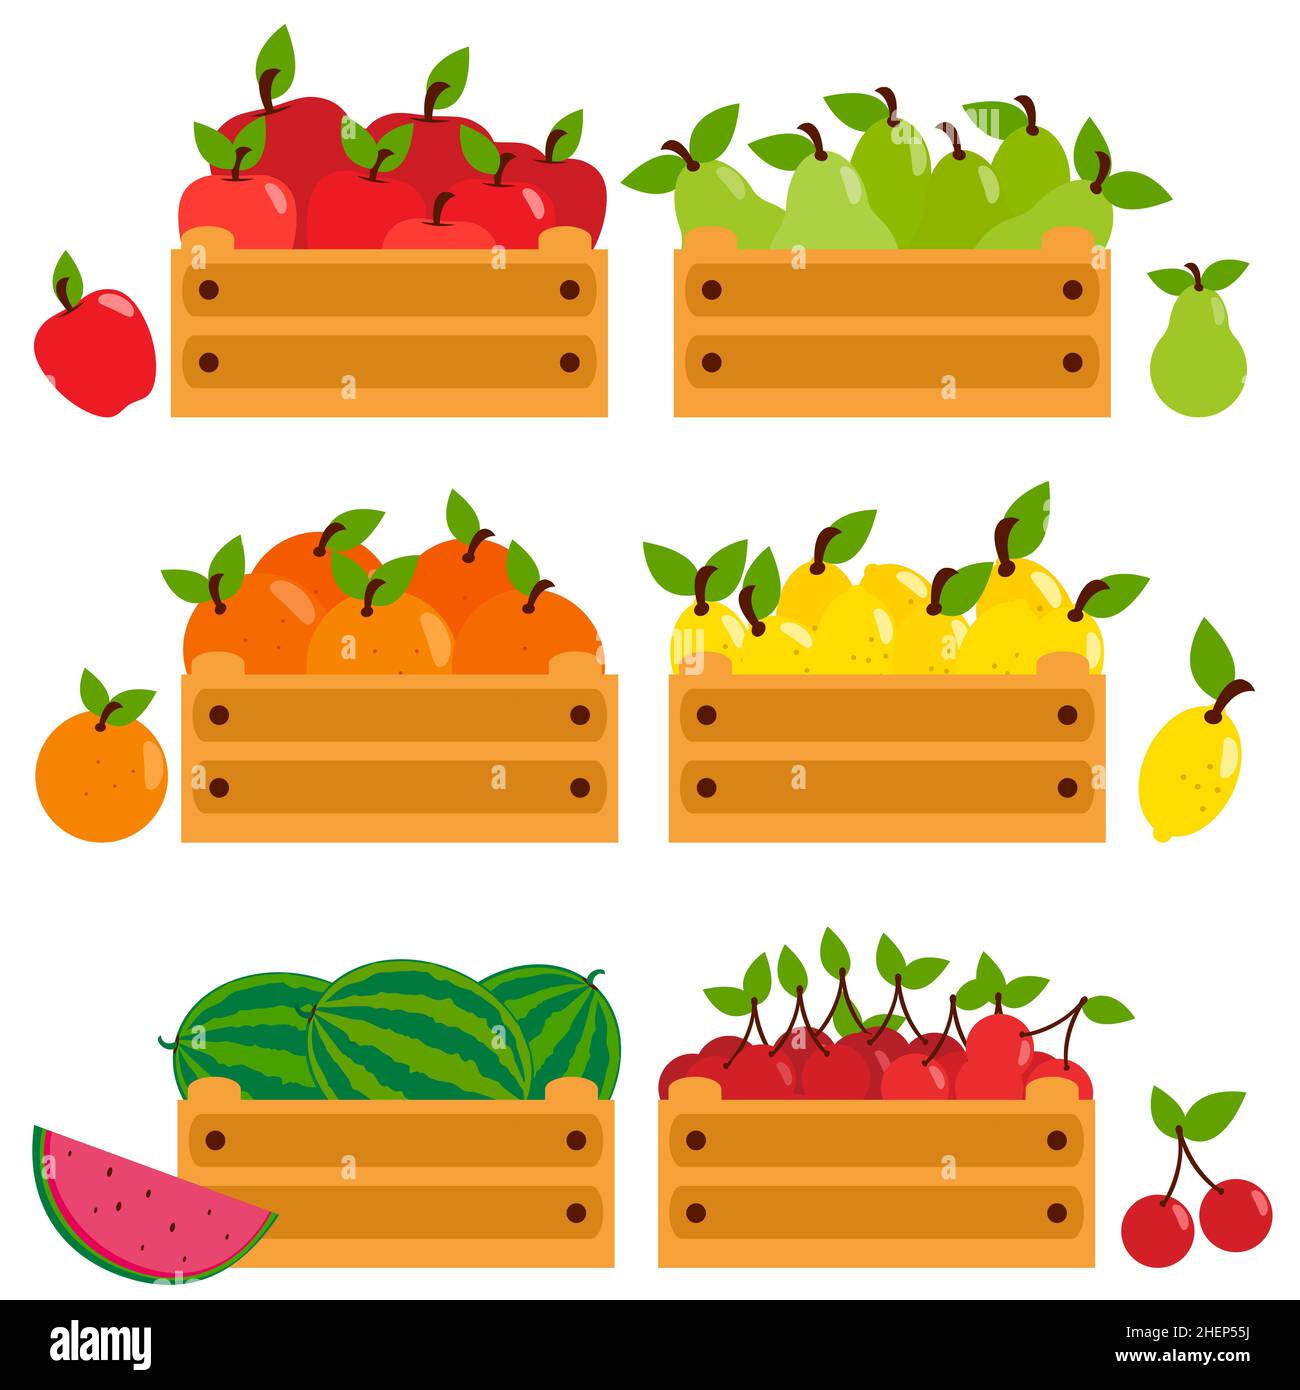 Fruits in wooden crates. Apples, pears, lemons, cherries, oranges and watermelons. Stock Photo